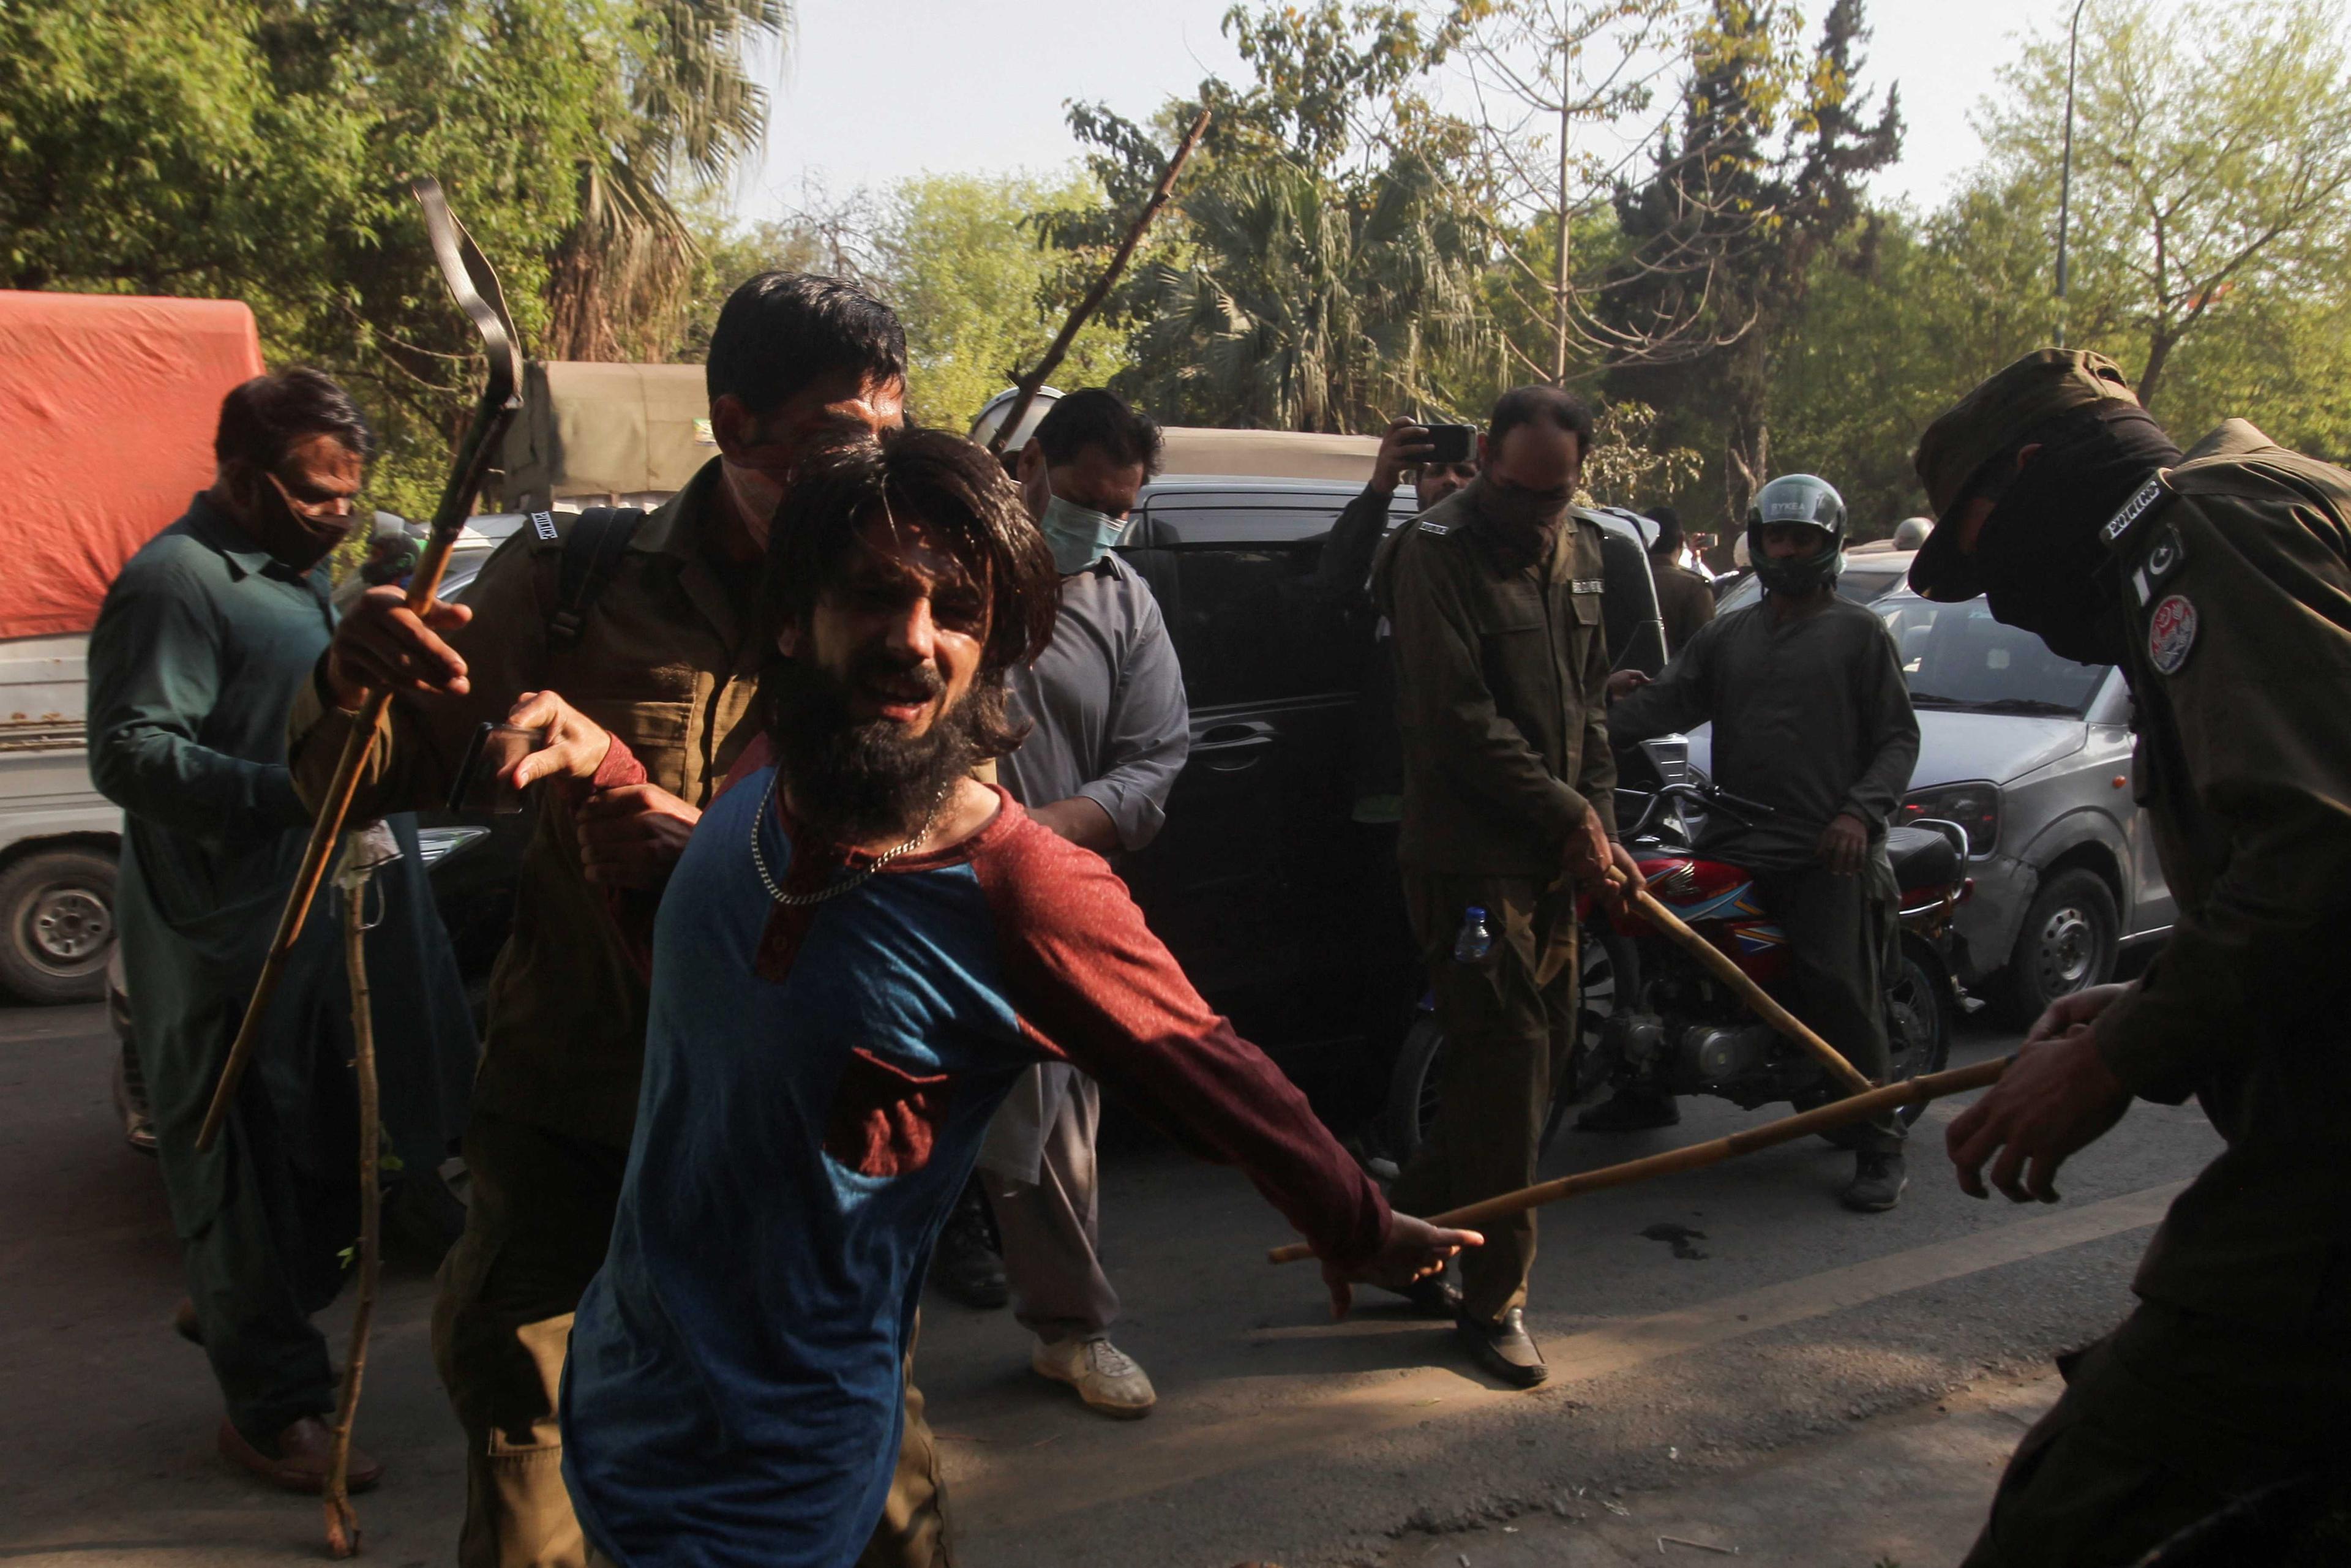 Police officers detain a supporter of former Prime Minister Imran Khan, during clashes ahead of an election campaign rally, in Lahore, Pakistan March 8. Photo: Reuters